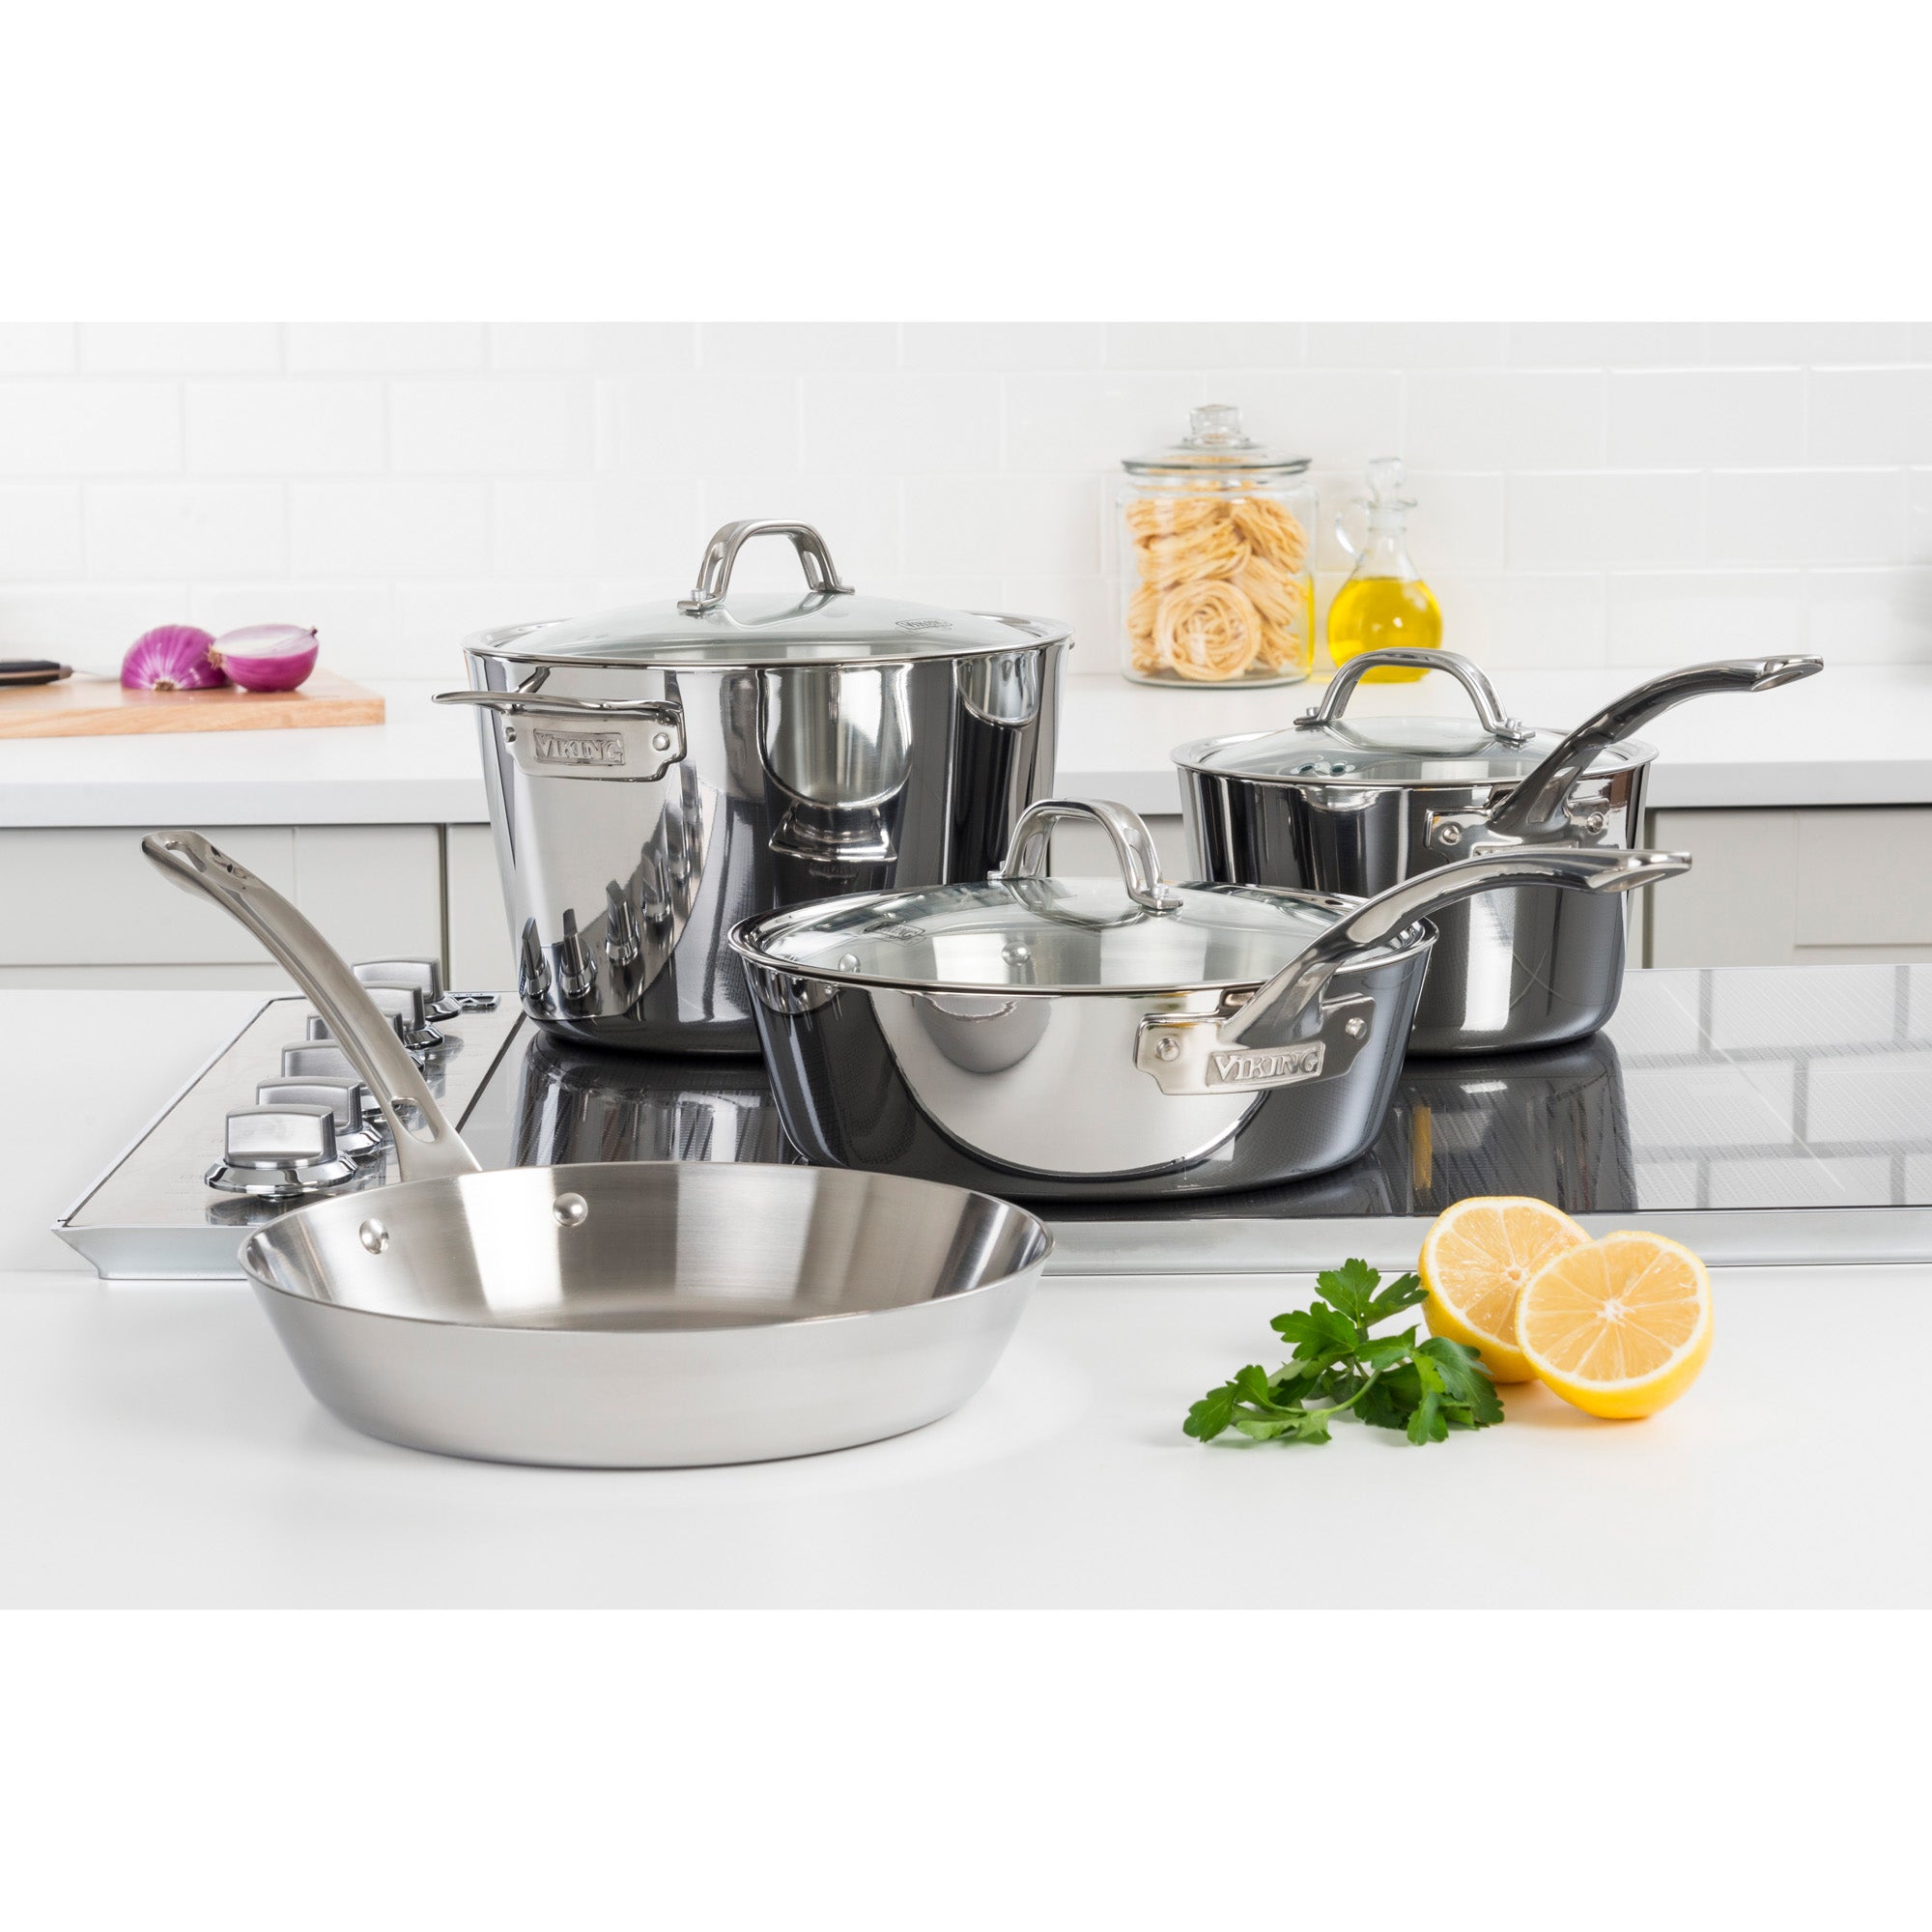 Viking Culinary 3-Ply Stainless Steel Cookware Set, 17 piece